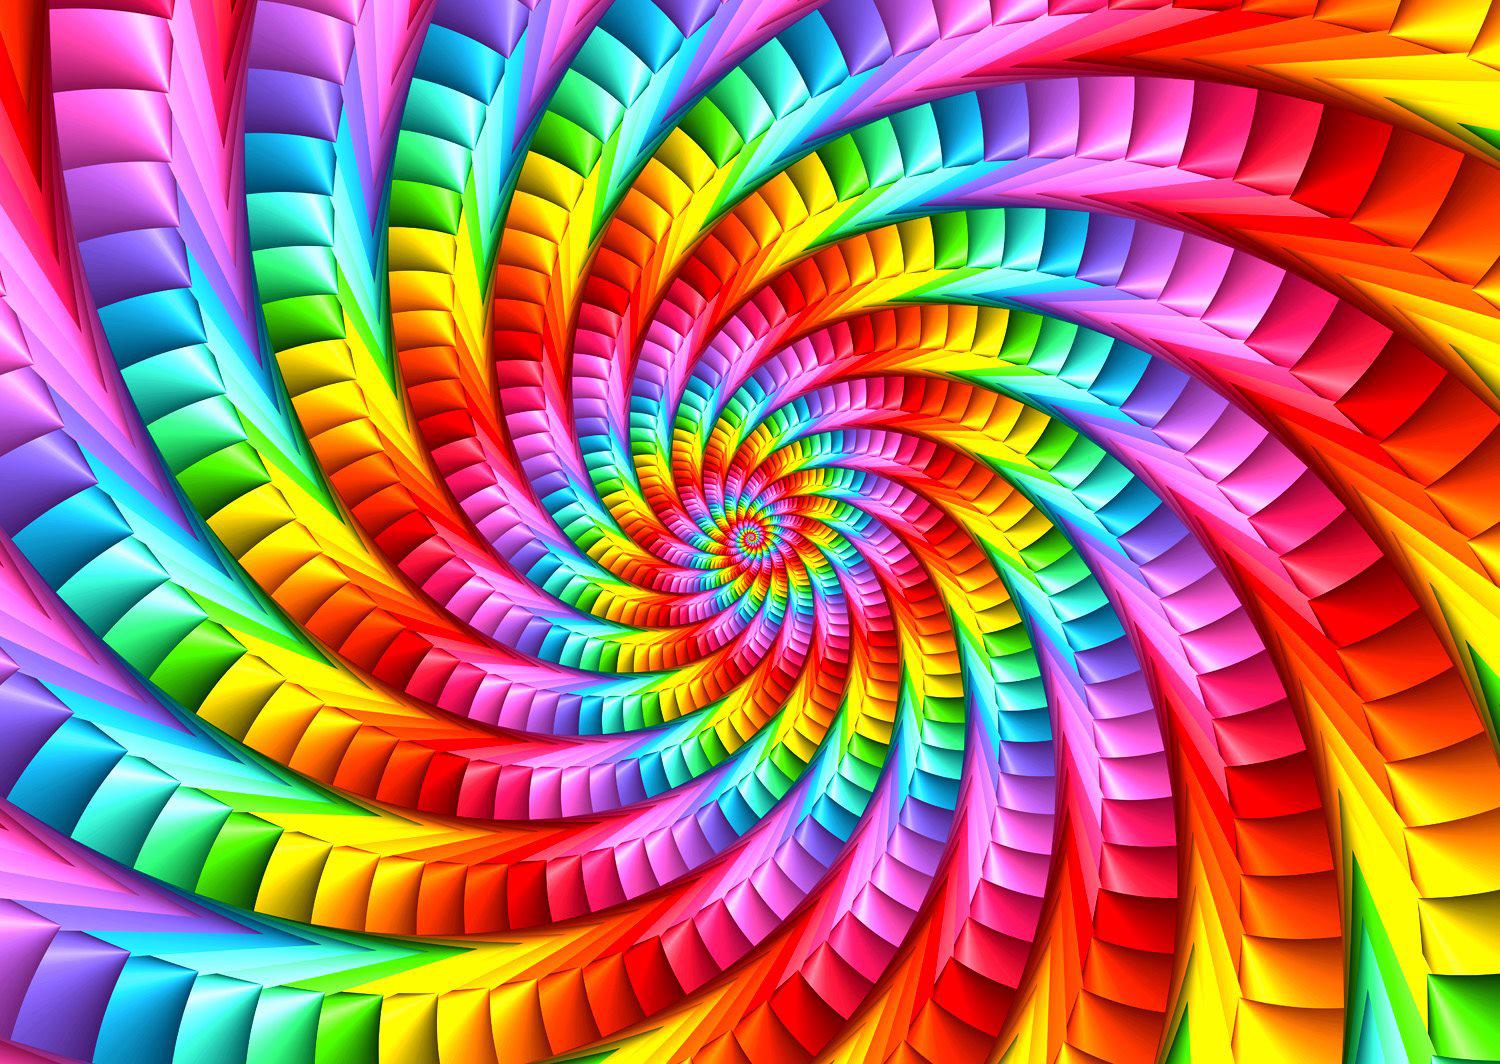 Puzzle Psychedelic Rainbow Spiral 1000